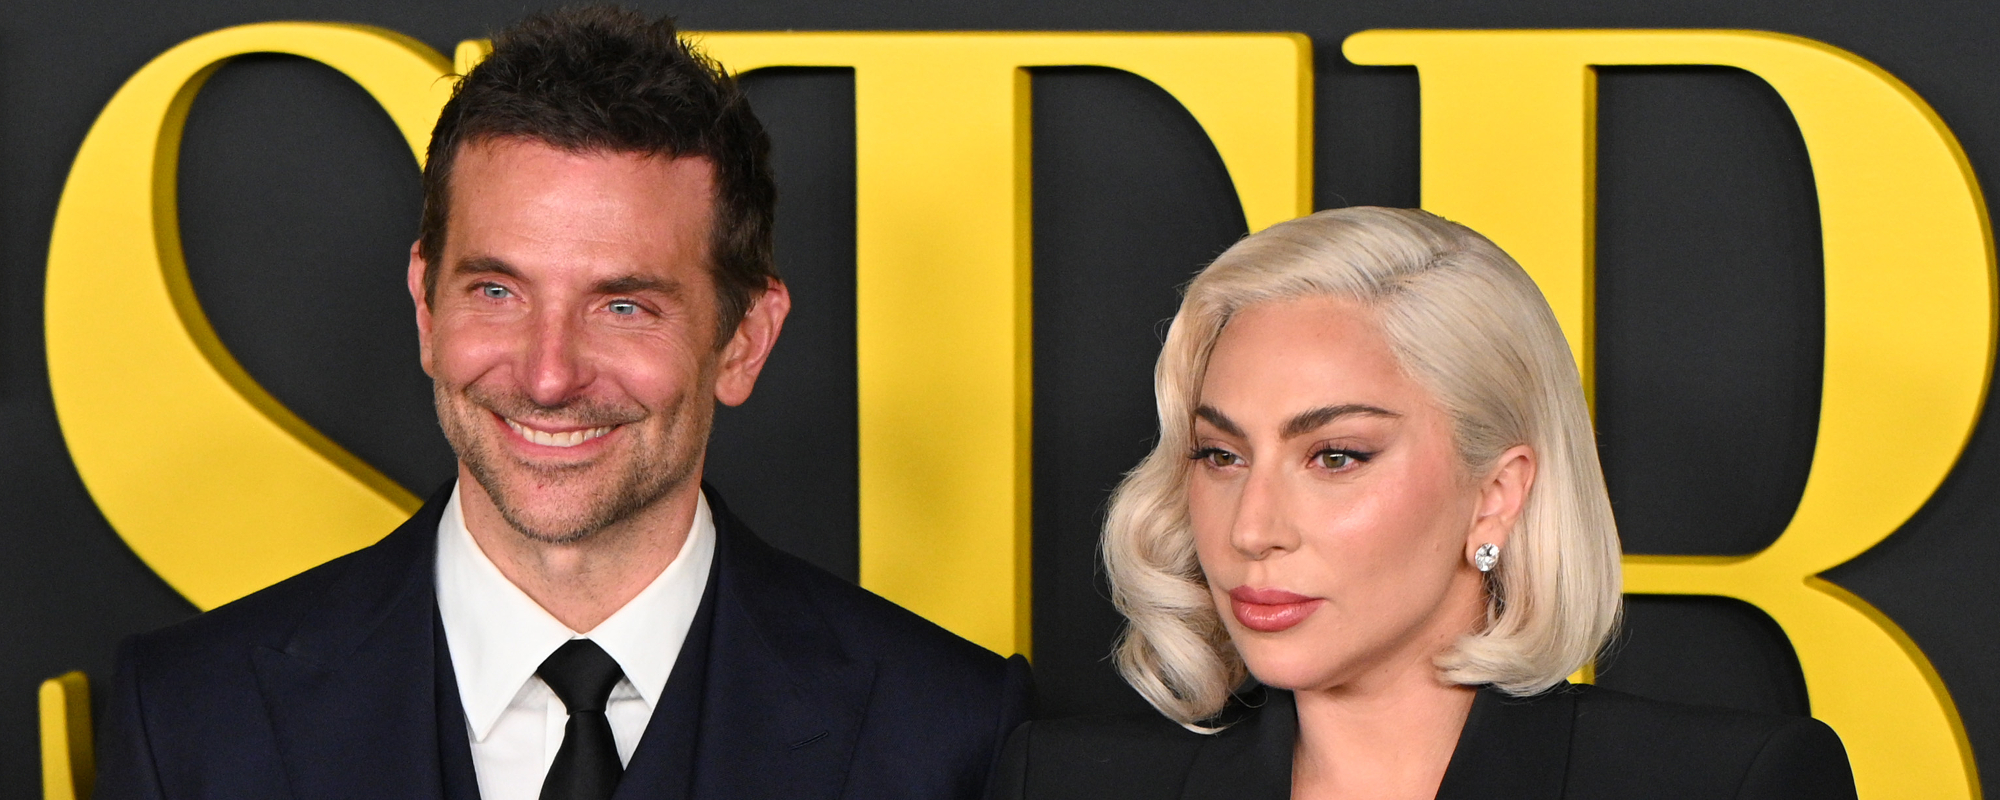 “It Means the World to Me”: Bradley Cooper Gushes Over Lady Gaga at ‘Maestro’ Premiere